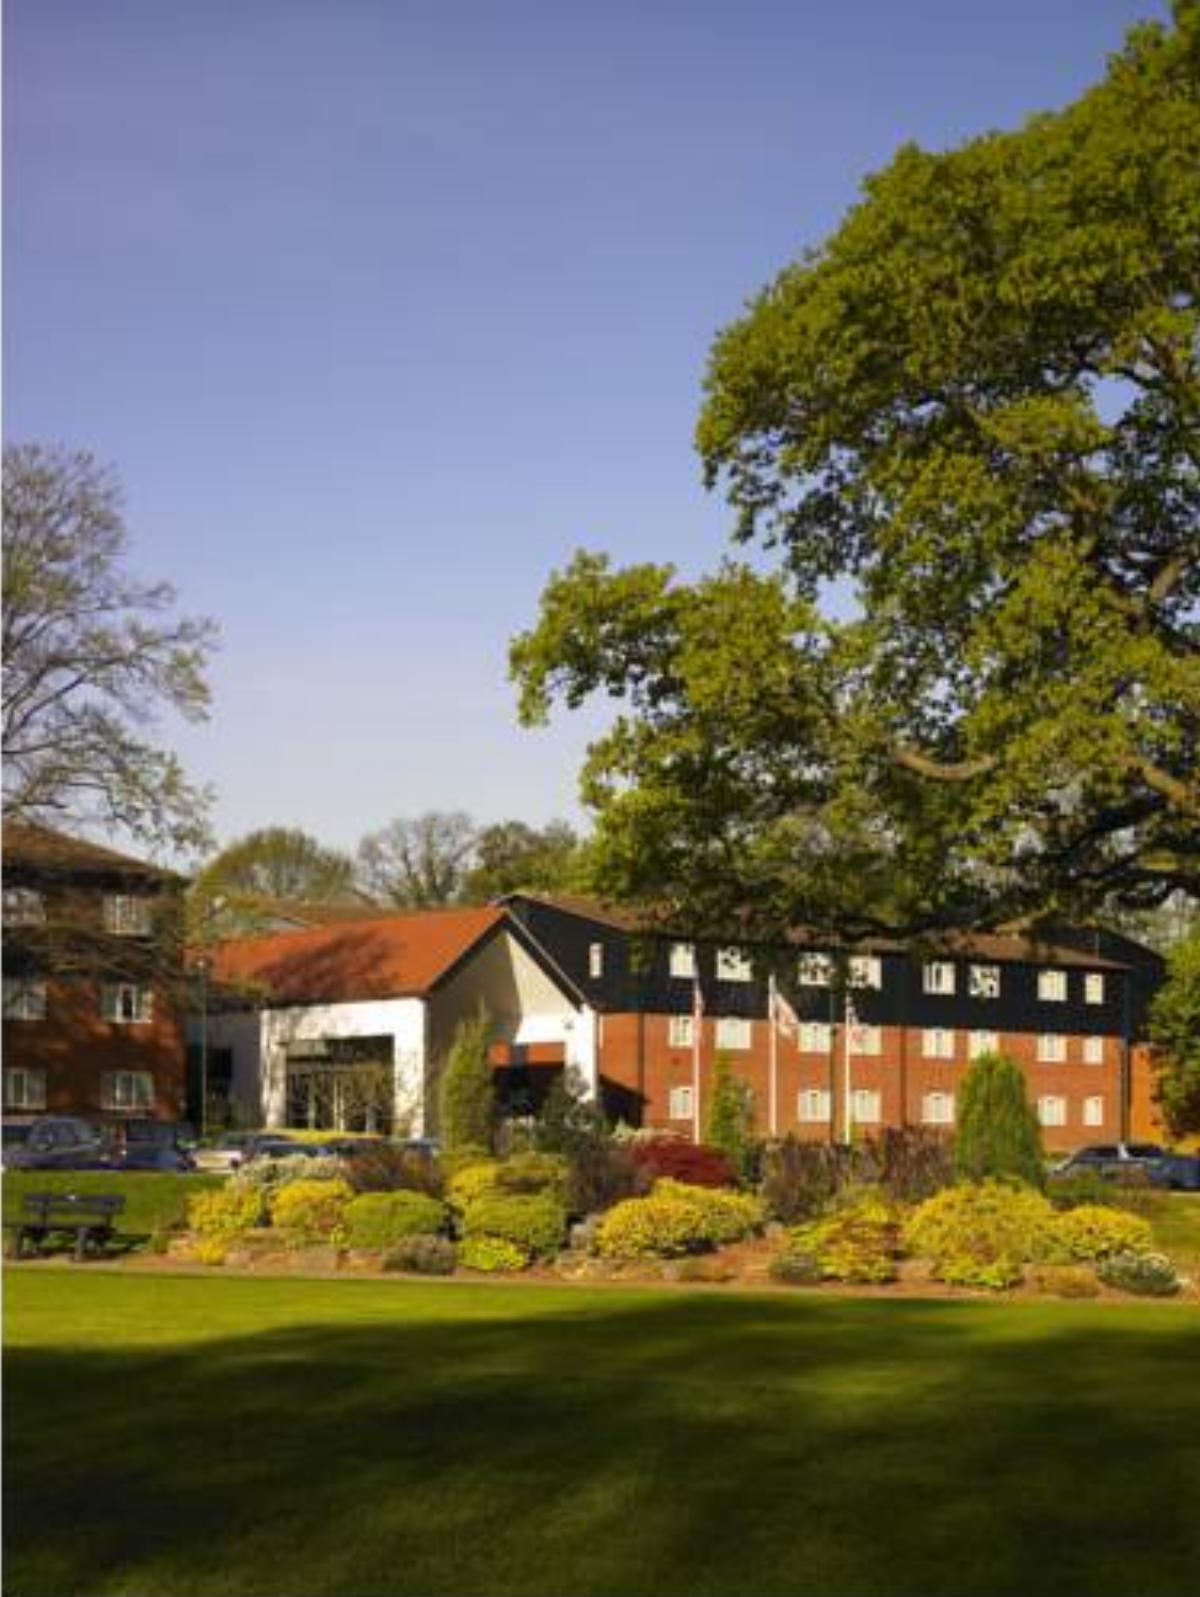 Meon Valley Marriott Hotel & Country Club